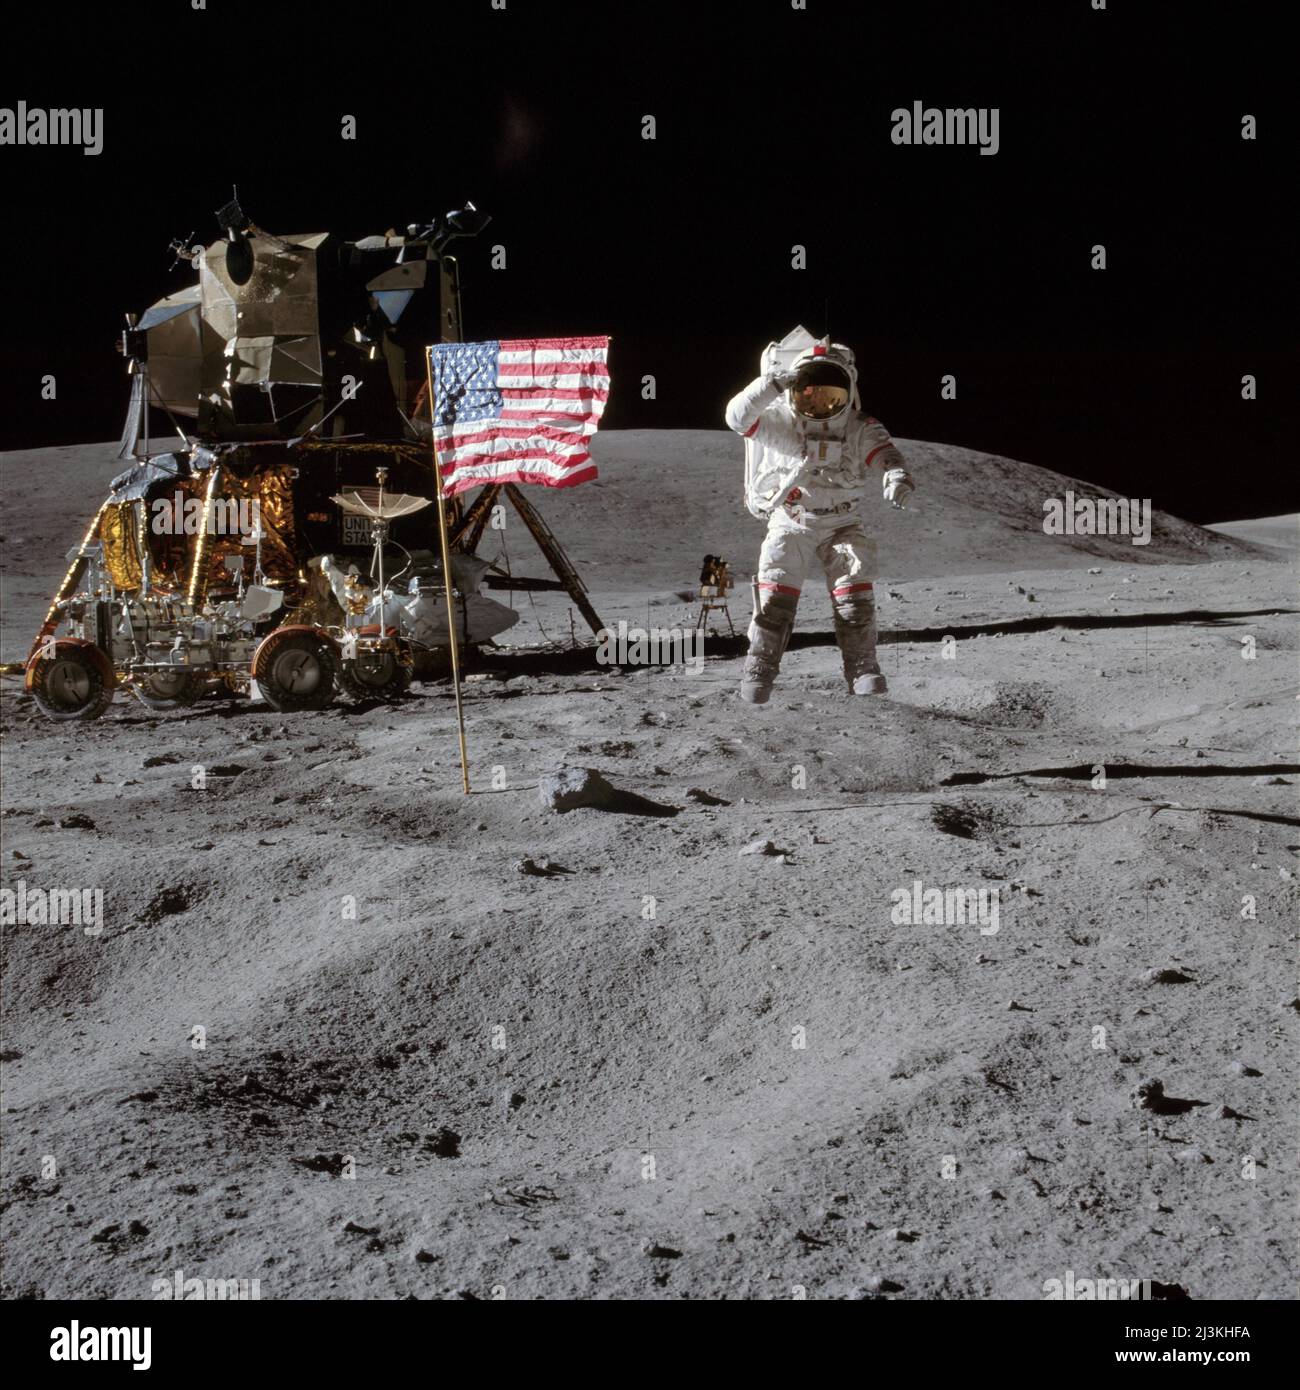 Astronaut John Young on the Moon during Apollo 16 mission jumping about 42 Centimeters high. Stock Photo